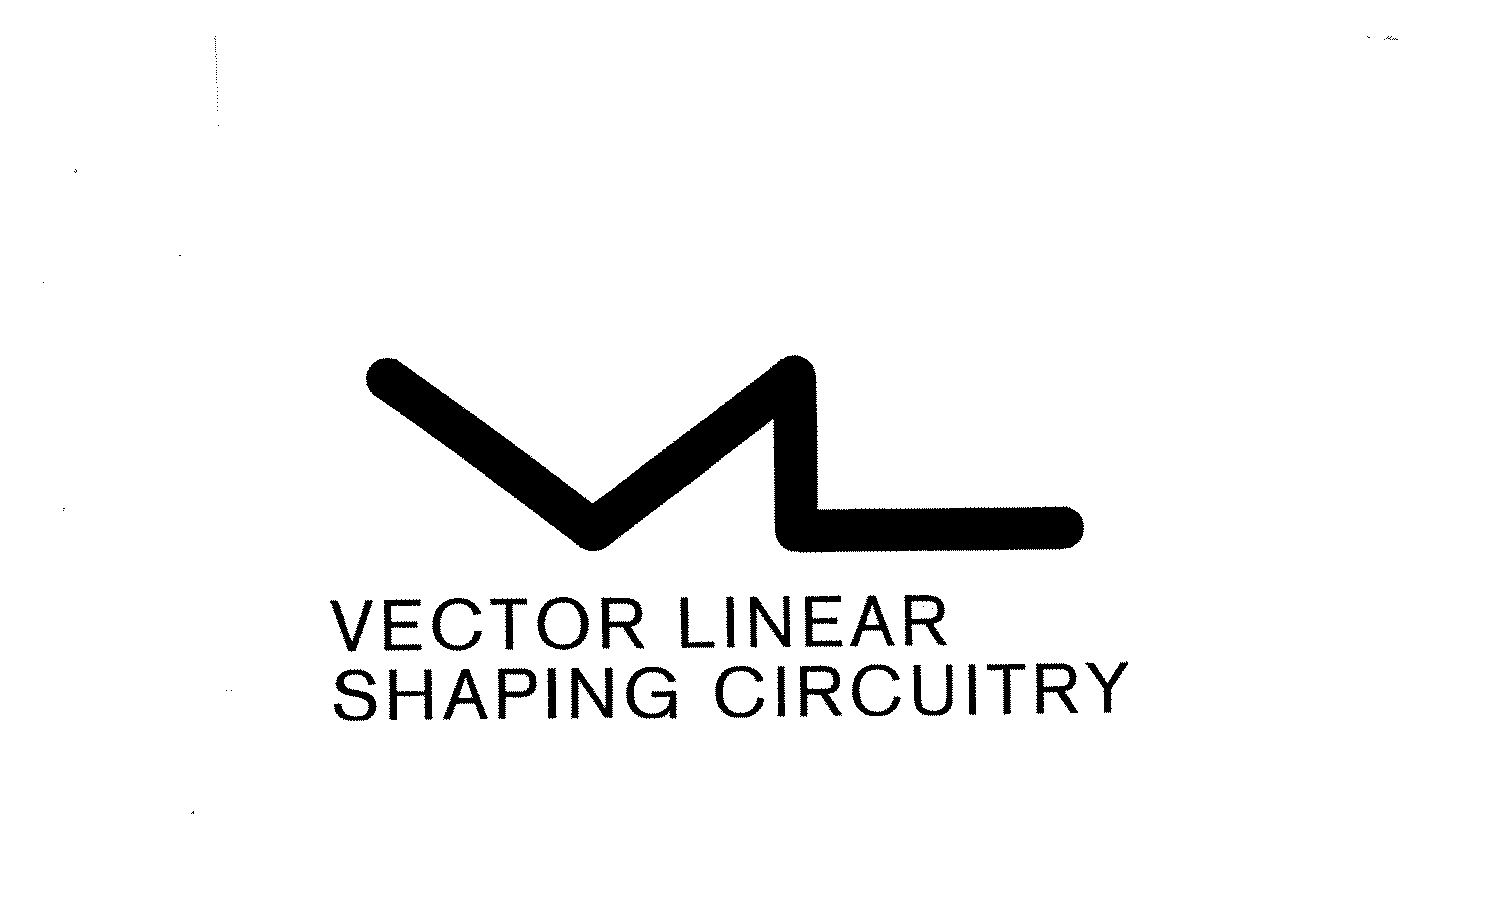  VL VECTOR LINEAR SHAPING CIRCUITRY